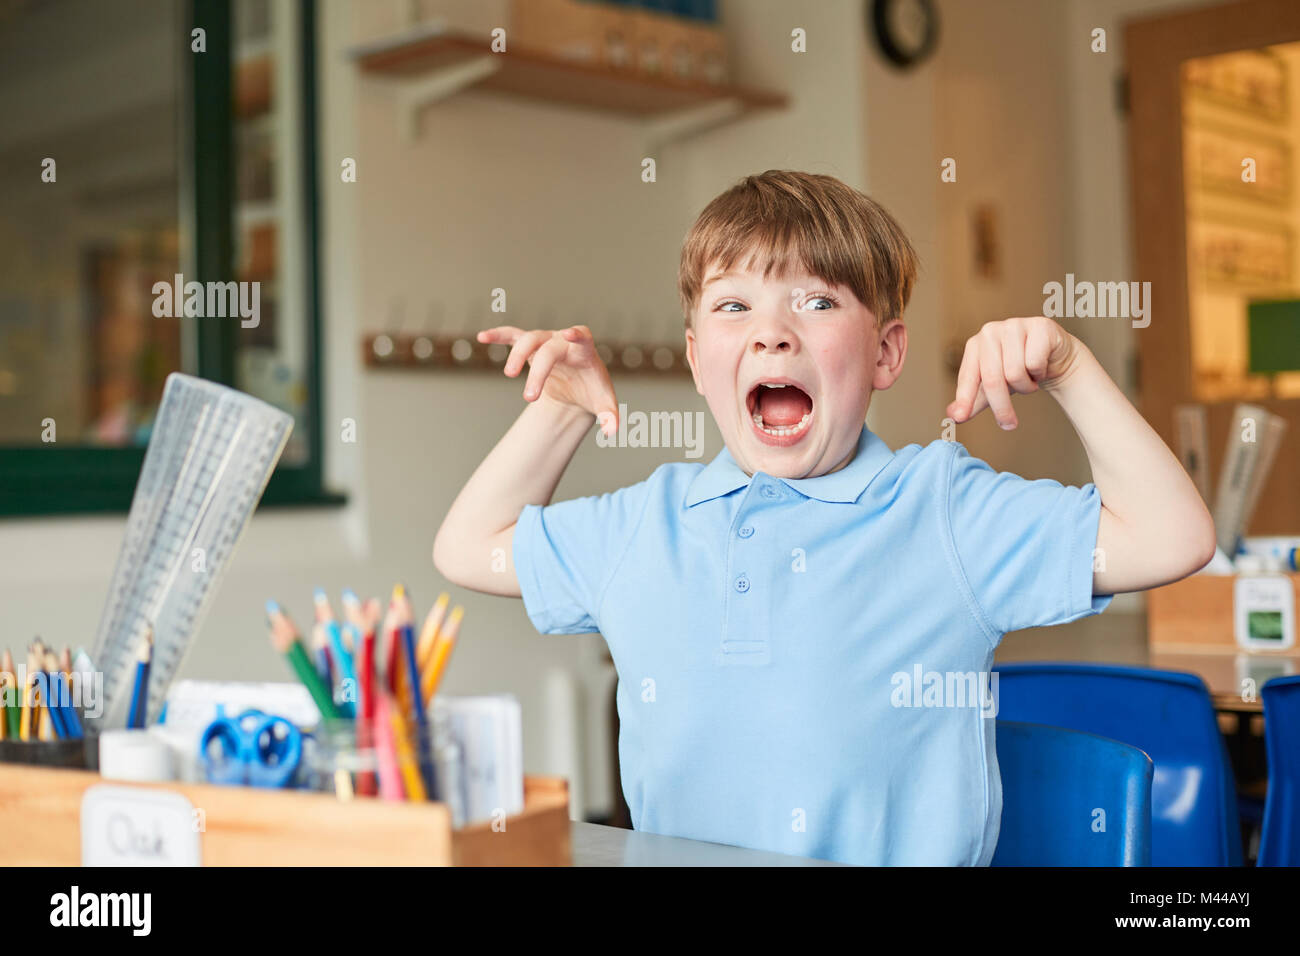 Primary schoolboy mimicking monster in classroom Stock Photo